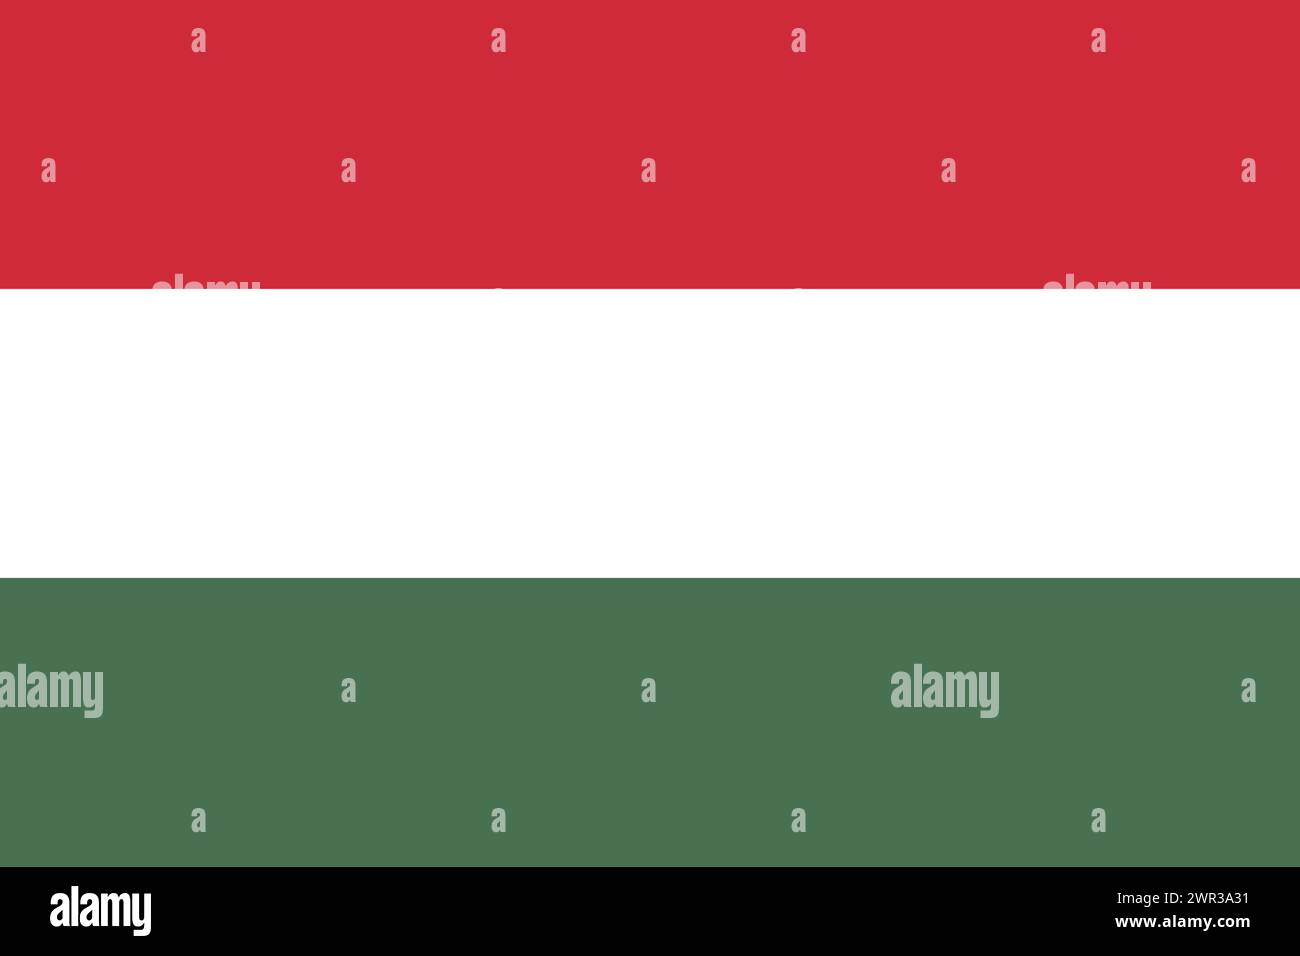 Hungary vector flag in official colors and 3:2 aspect ratio. Stock Vector